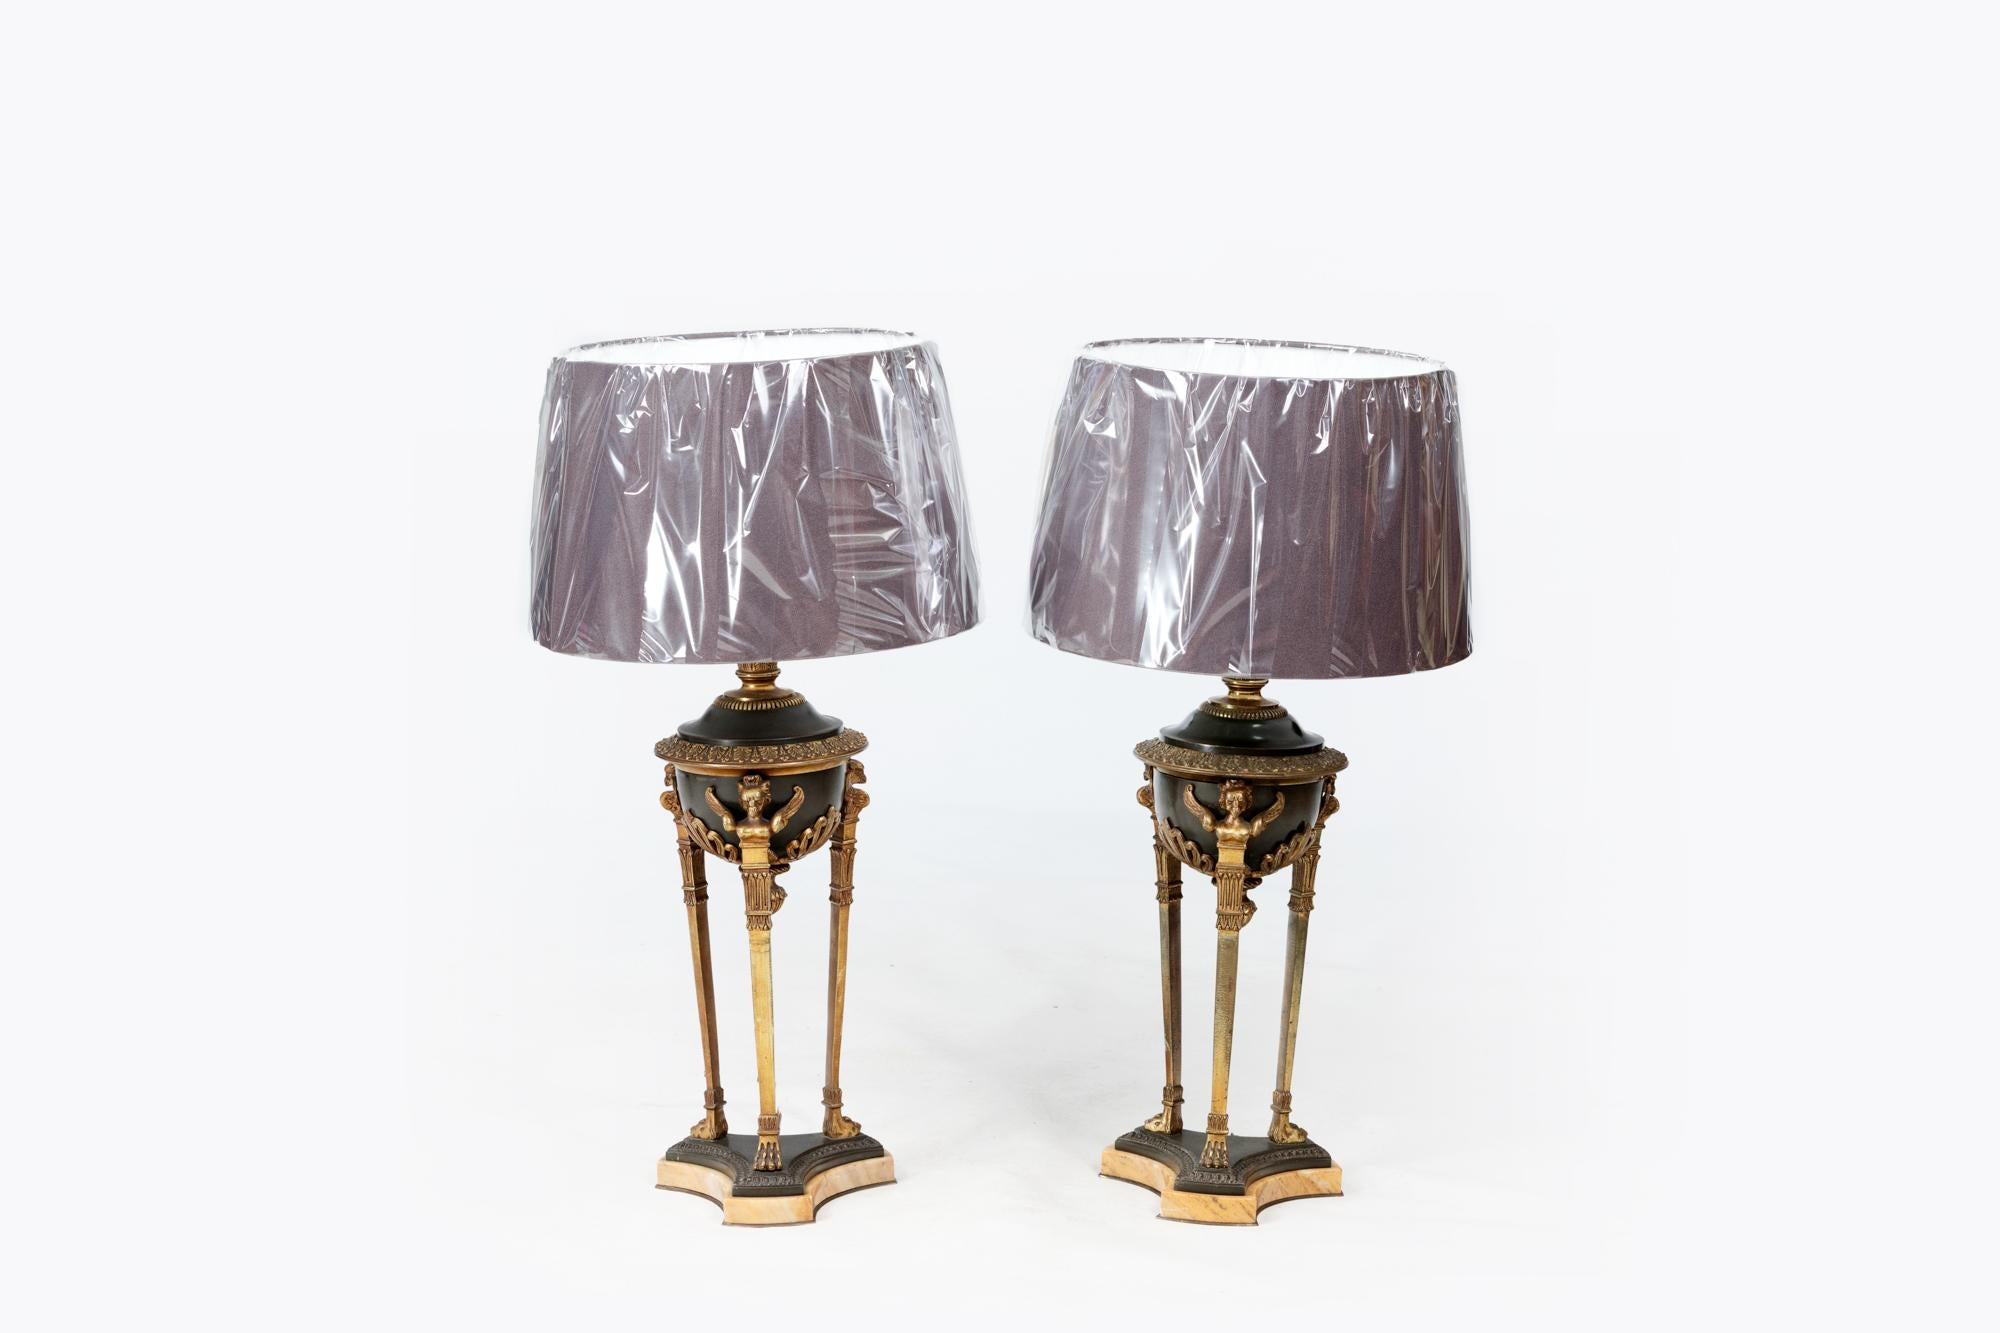 Pair of 19th Century Empire table lamps with three brass legs, ormolu eagle busts in relief and Corinthian style capitals. The pair sit on triform bases featuring lion paw feet on sienna marble plinths.